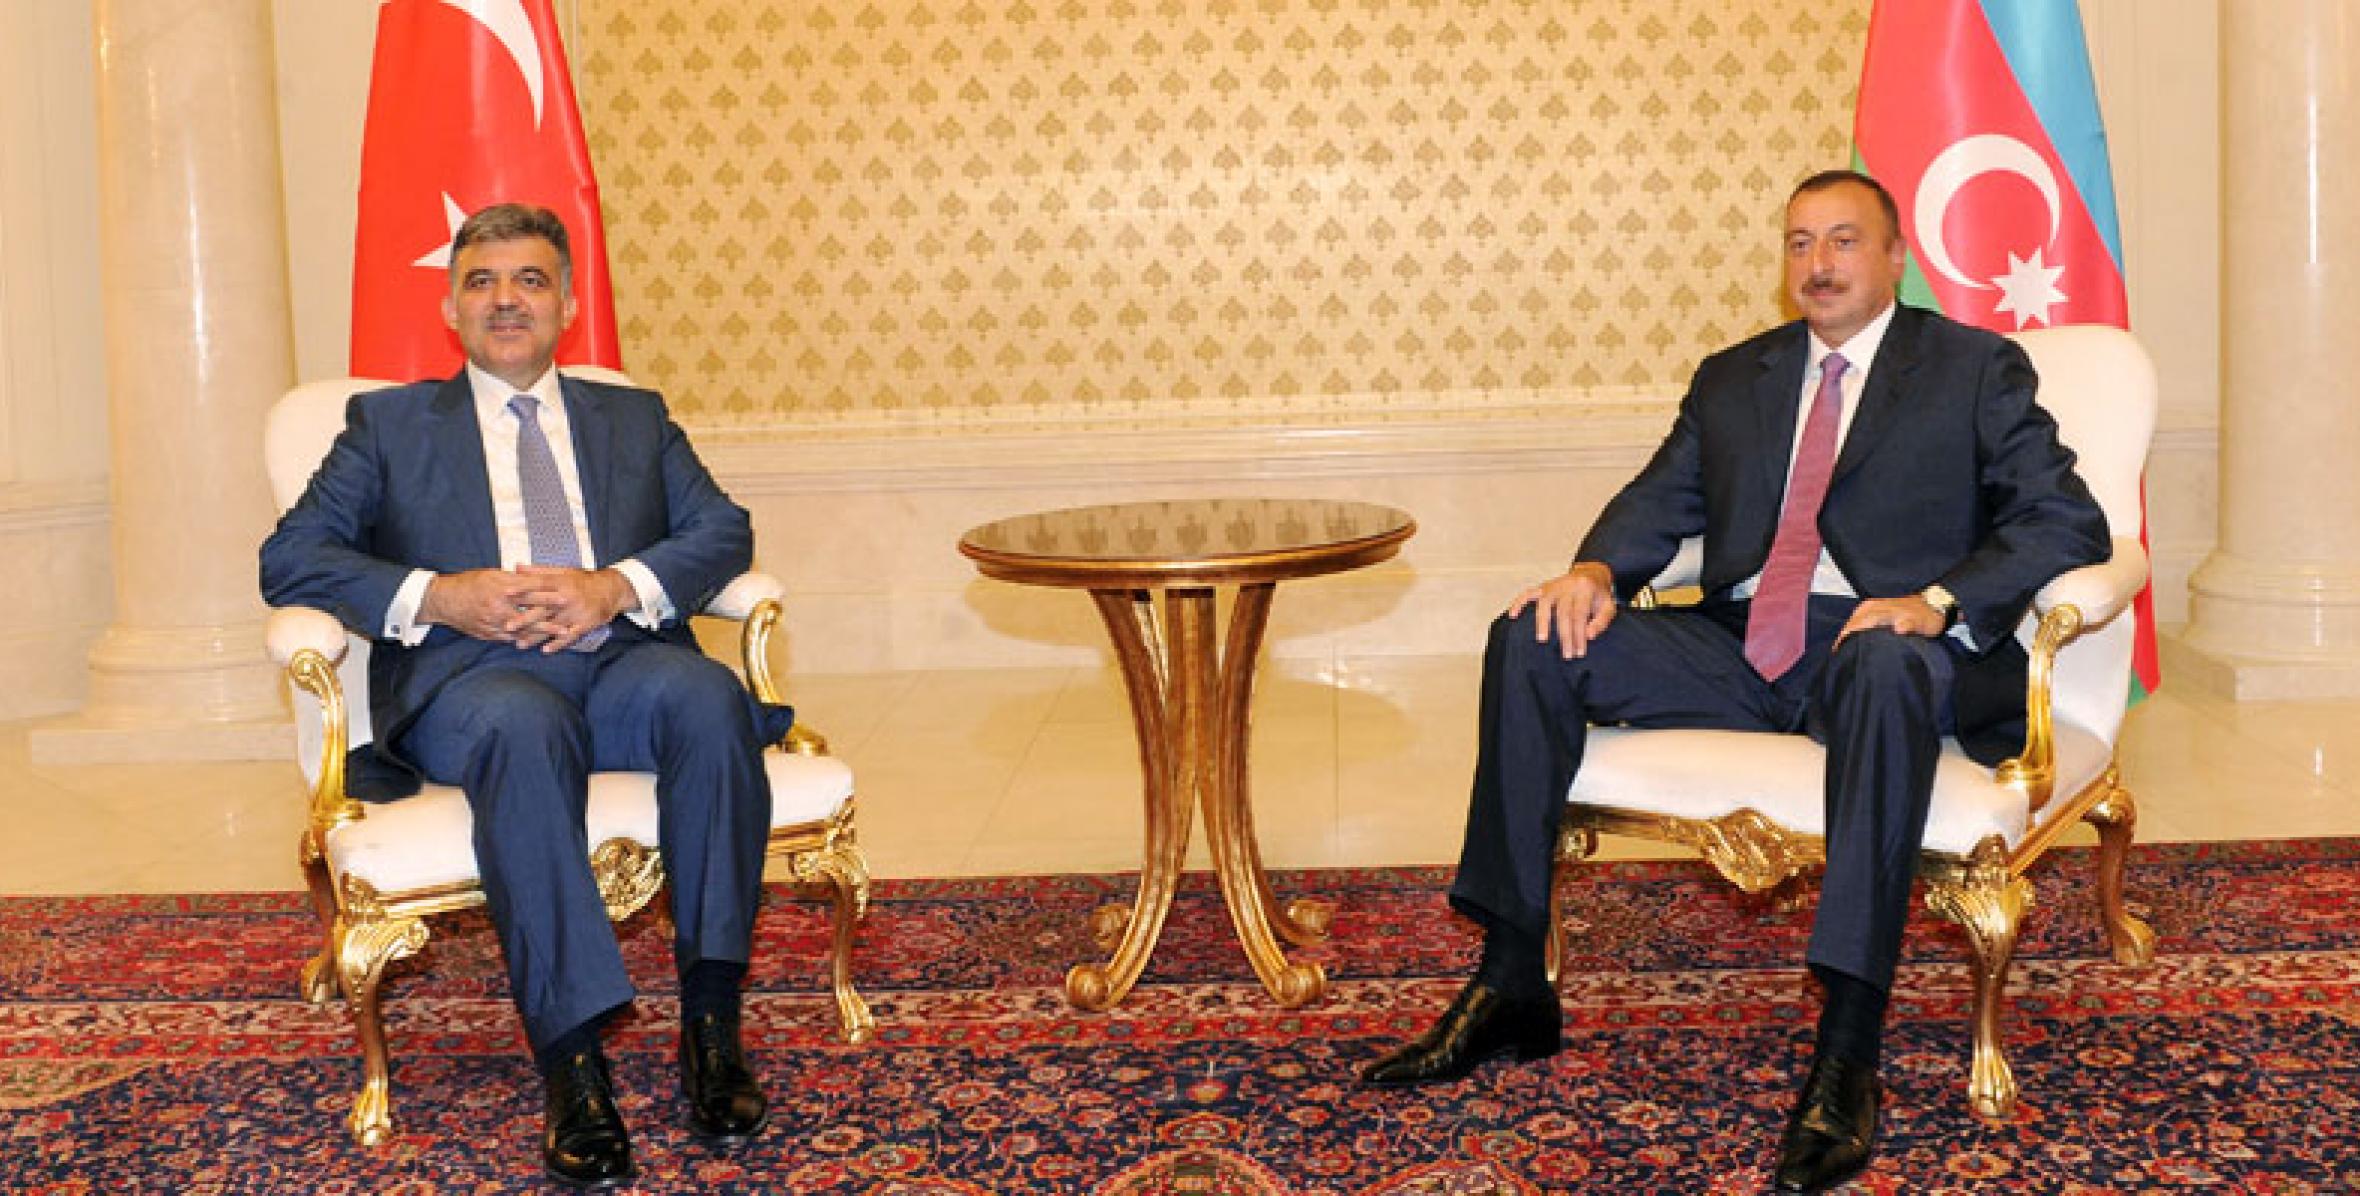 Face-to-face meeting between Ilham Aliyev and Abdullah Gul, the President of Turkey